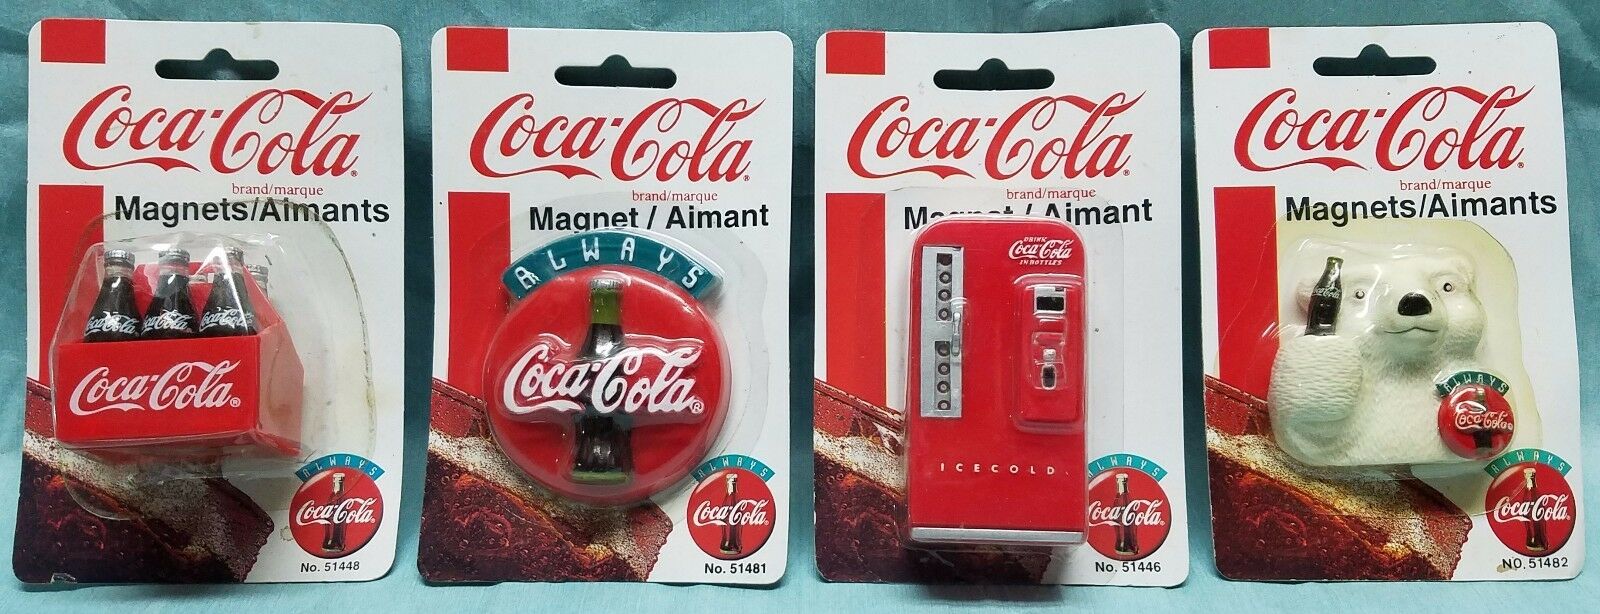 1998 and 1999 Coca-Cola Magnets, Collectibles, Sealed In Original Packages